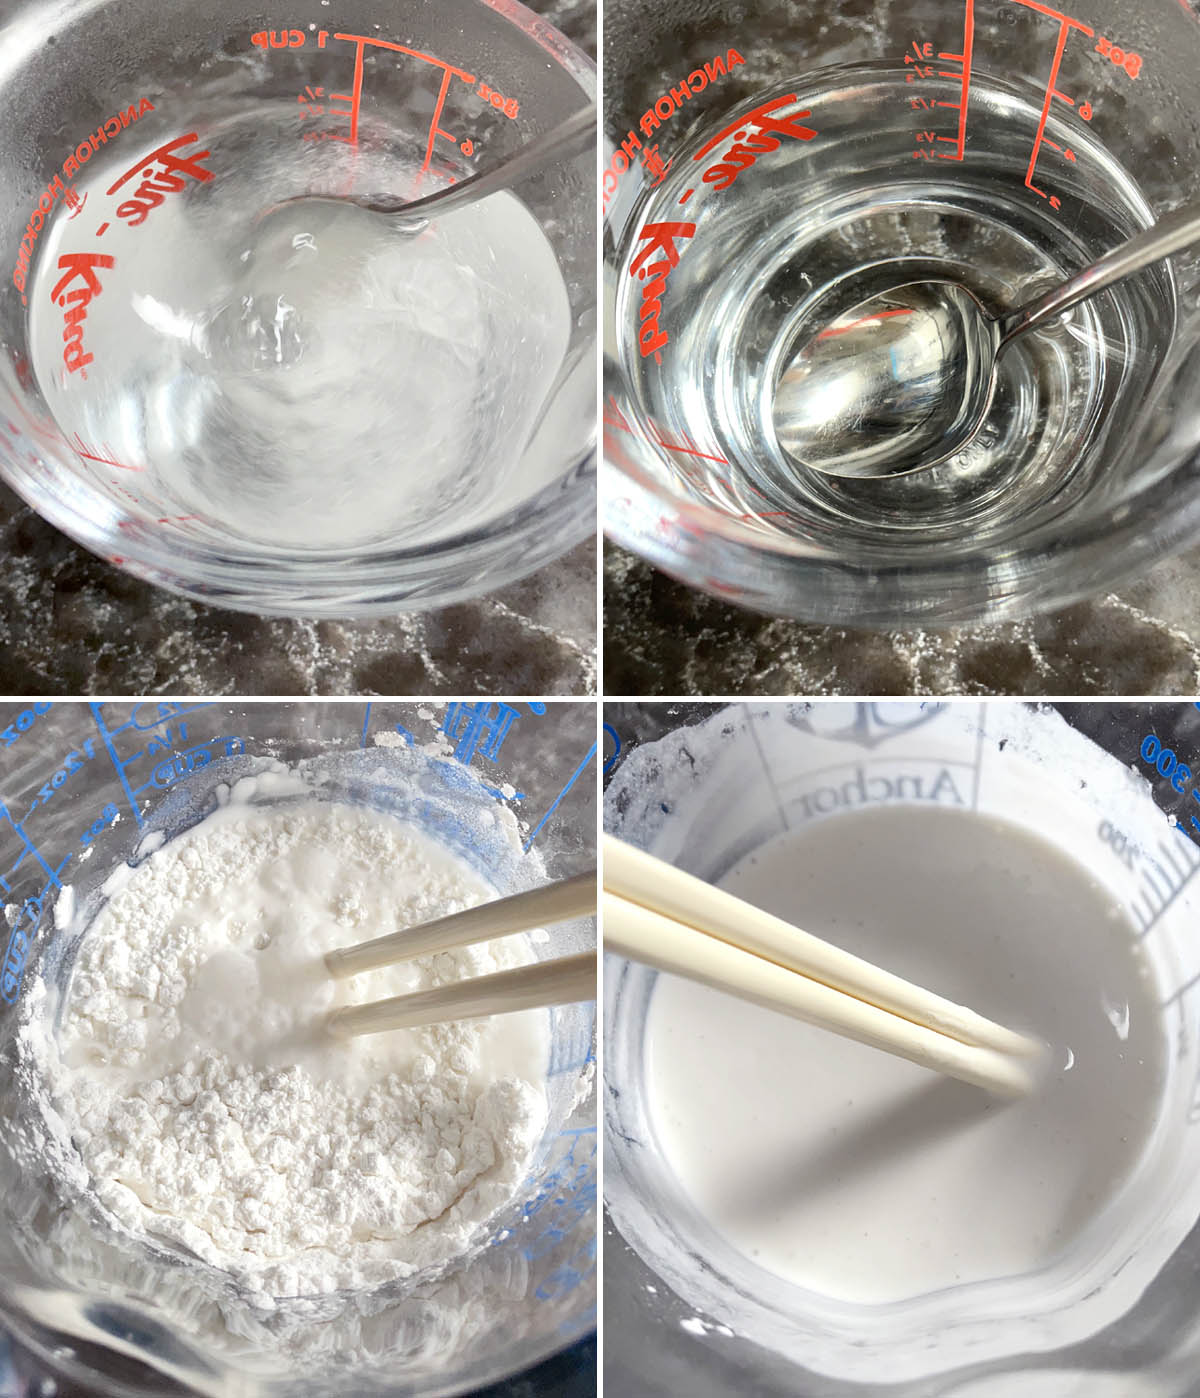 White sugar being dissolved in water, a white powder and water being stirred with chopsticks in a measuring cup.